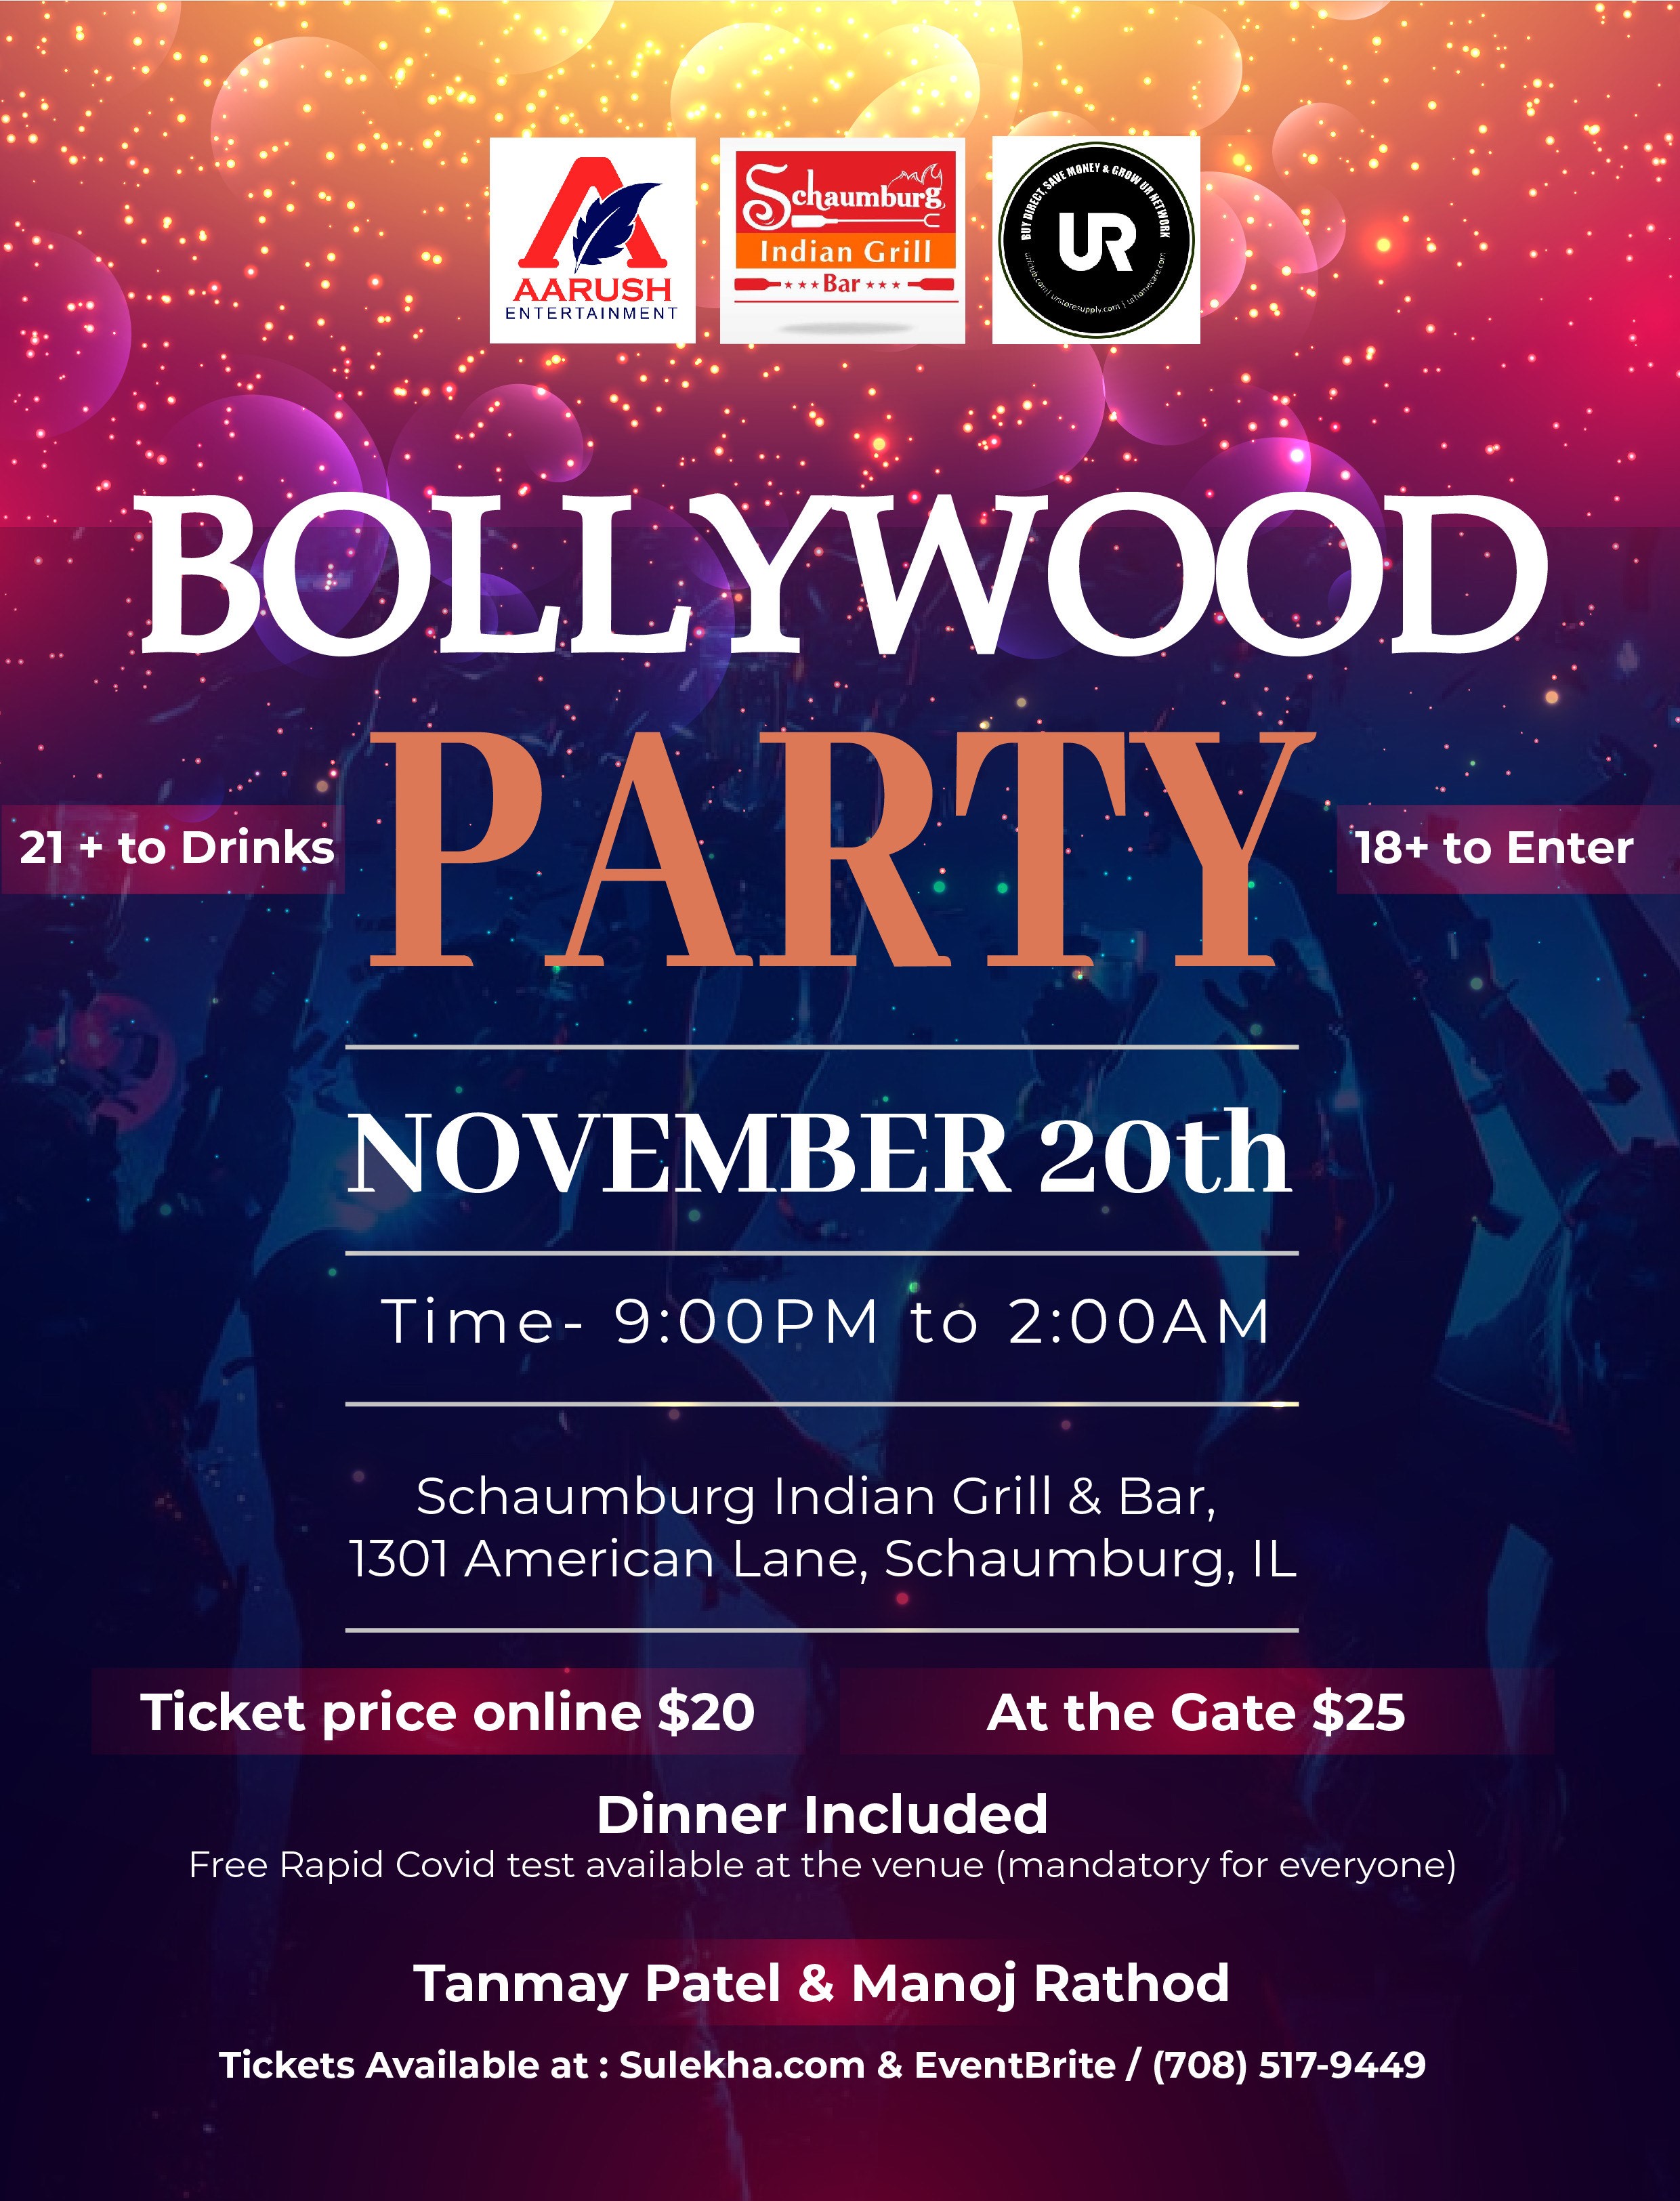 Bollywood party